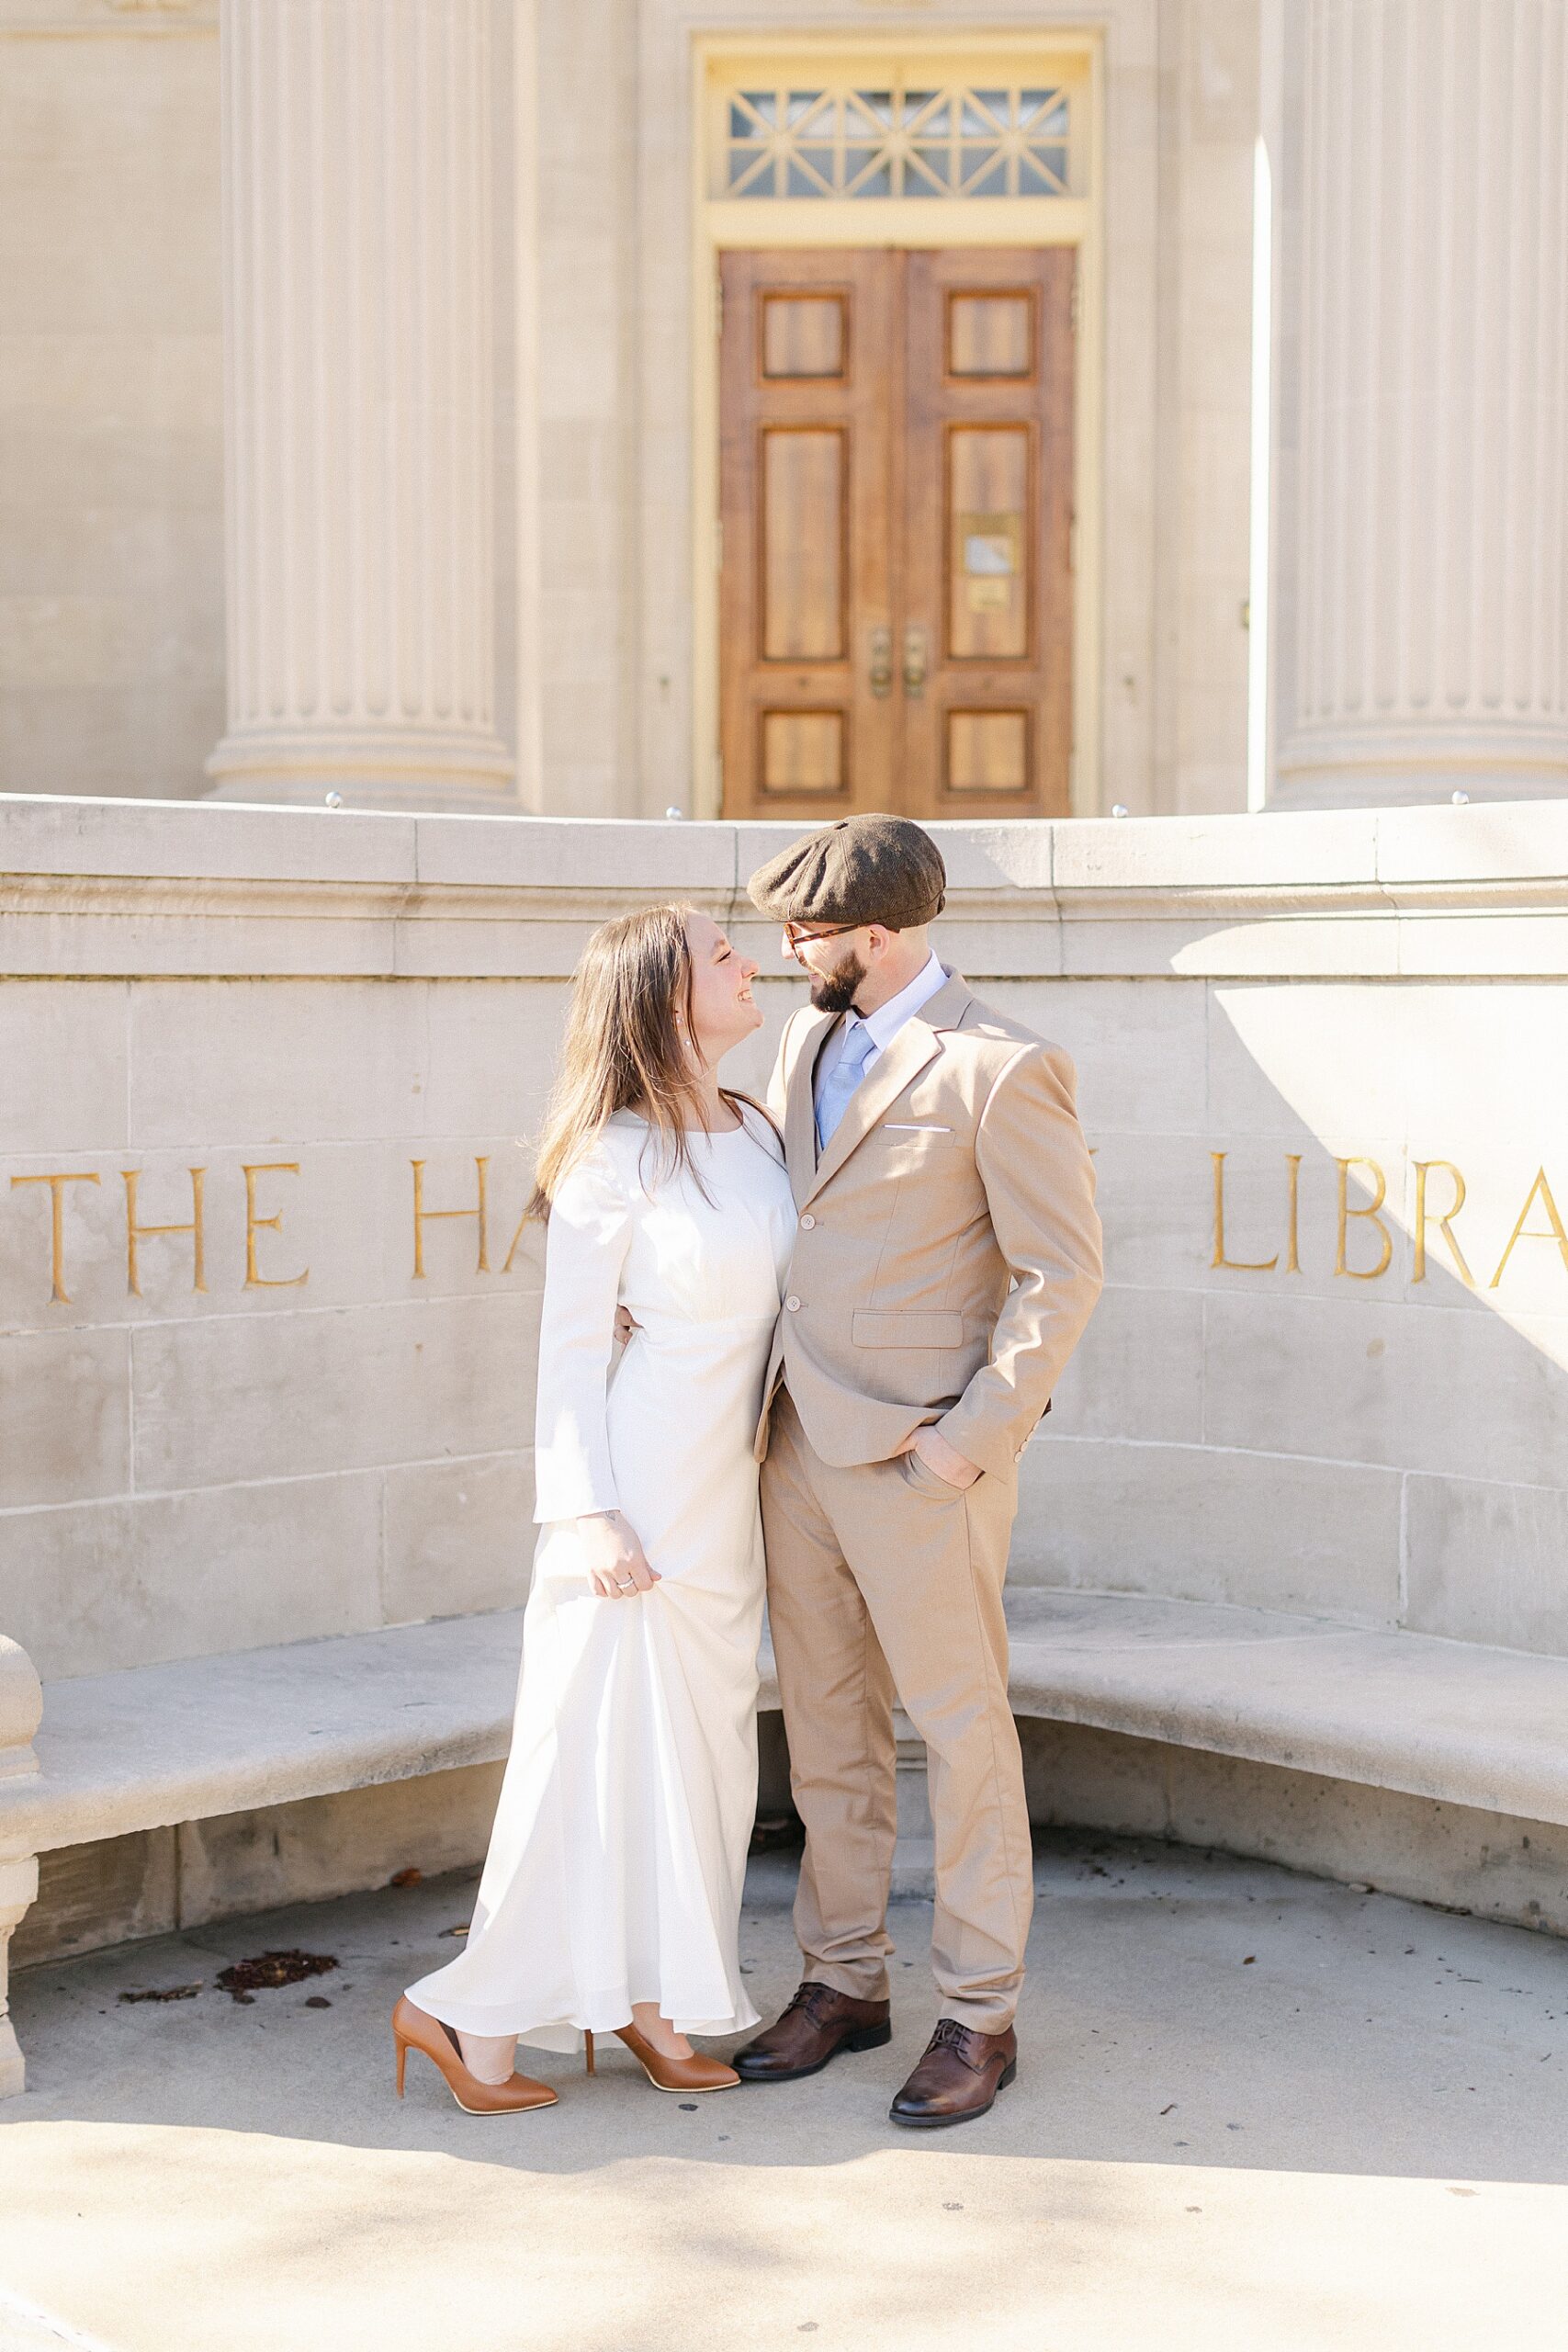 Bride and groom elopement in Winchester, VA at the historic Handley Library